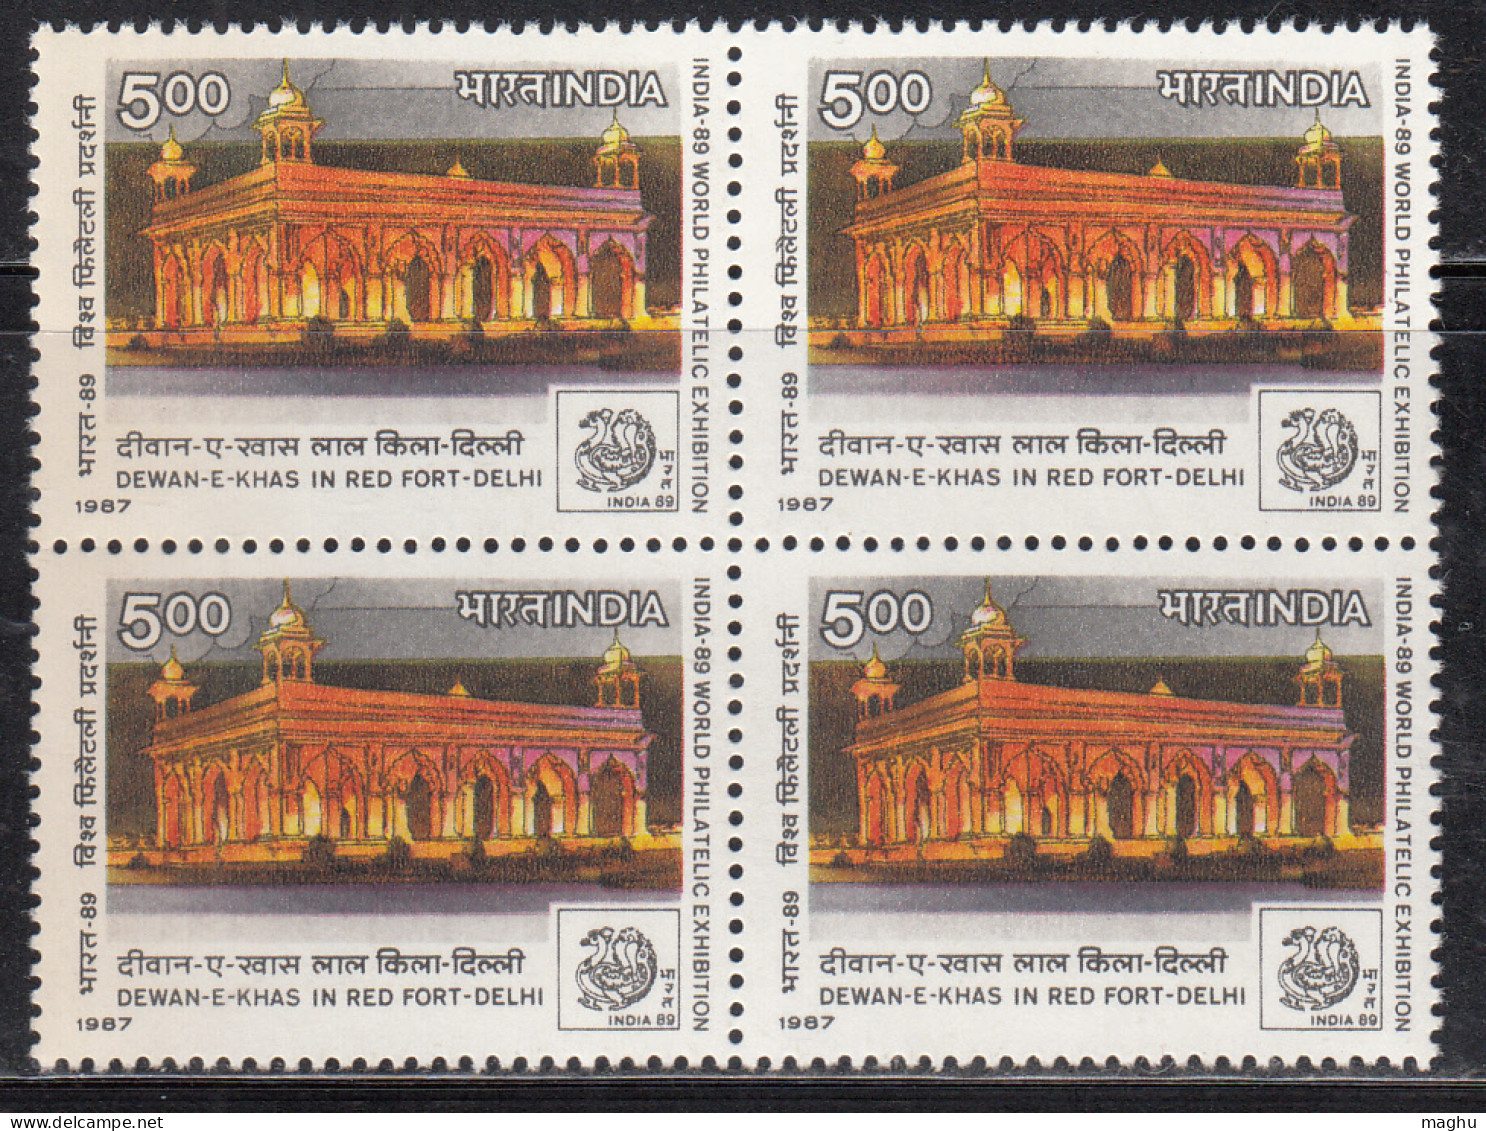 Block Of 4, India MNH 1987, India 89 Stamp Exhibition, Monuments, Monument Dewan E Khas, Red Fort, - Blocks & Sheetlets